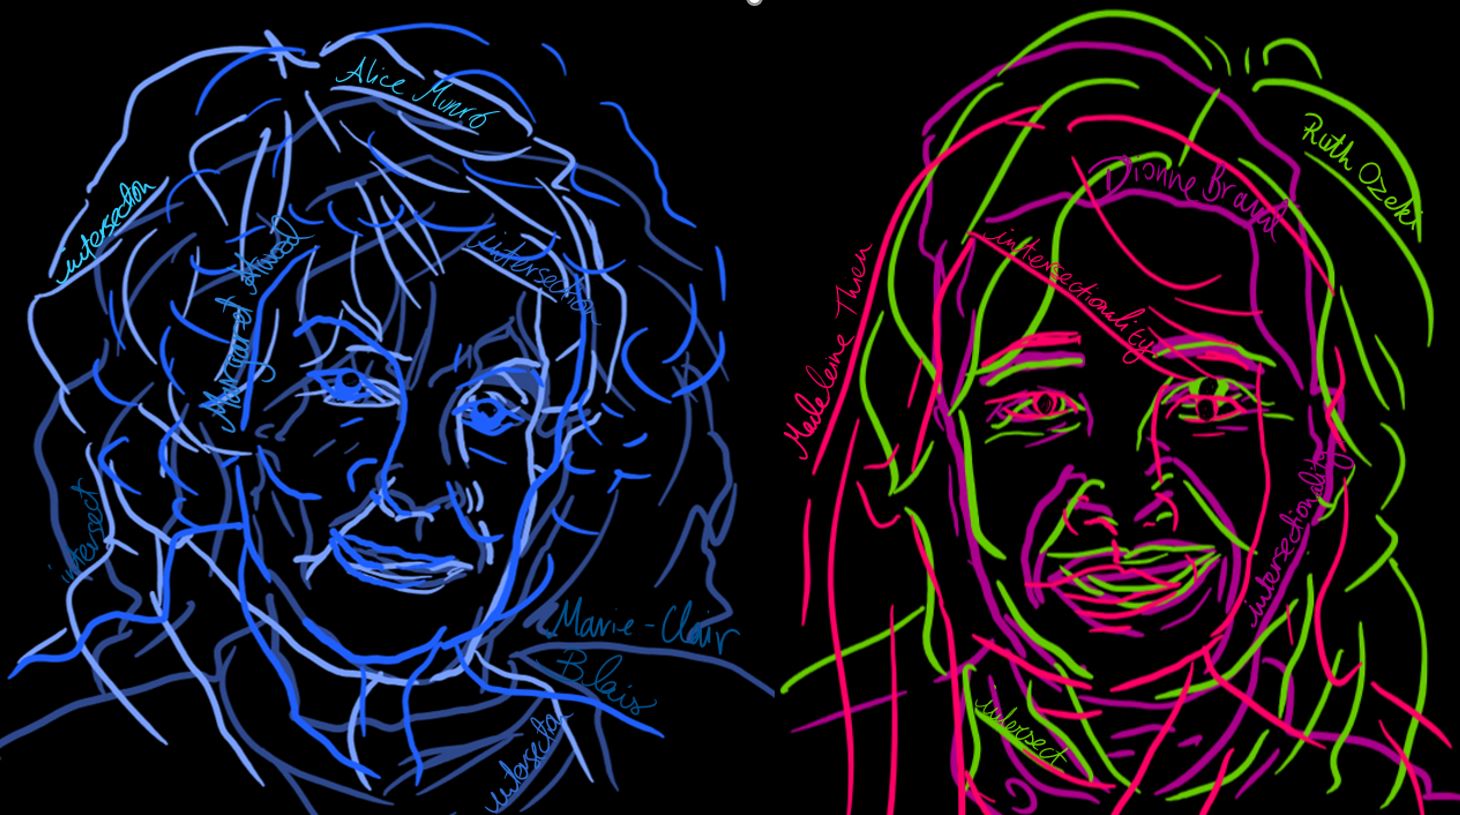 On the left side of a black background, three line-portraits of Canadian feminist authors of the CanLit boom (Alice Munro, Margaret Atwood, and Marie-Claire Blais) in shades of blue are layered one on top of the other. On the right, three line-portraits of contemporary feminist Canadian authors (Dionne Brand, Ruth Ozeki, and Madeleine Thien) in green, pink, and purple are also layered, echoing the first image.